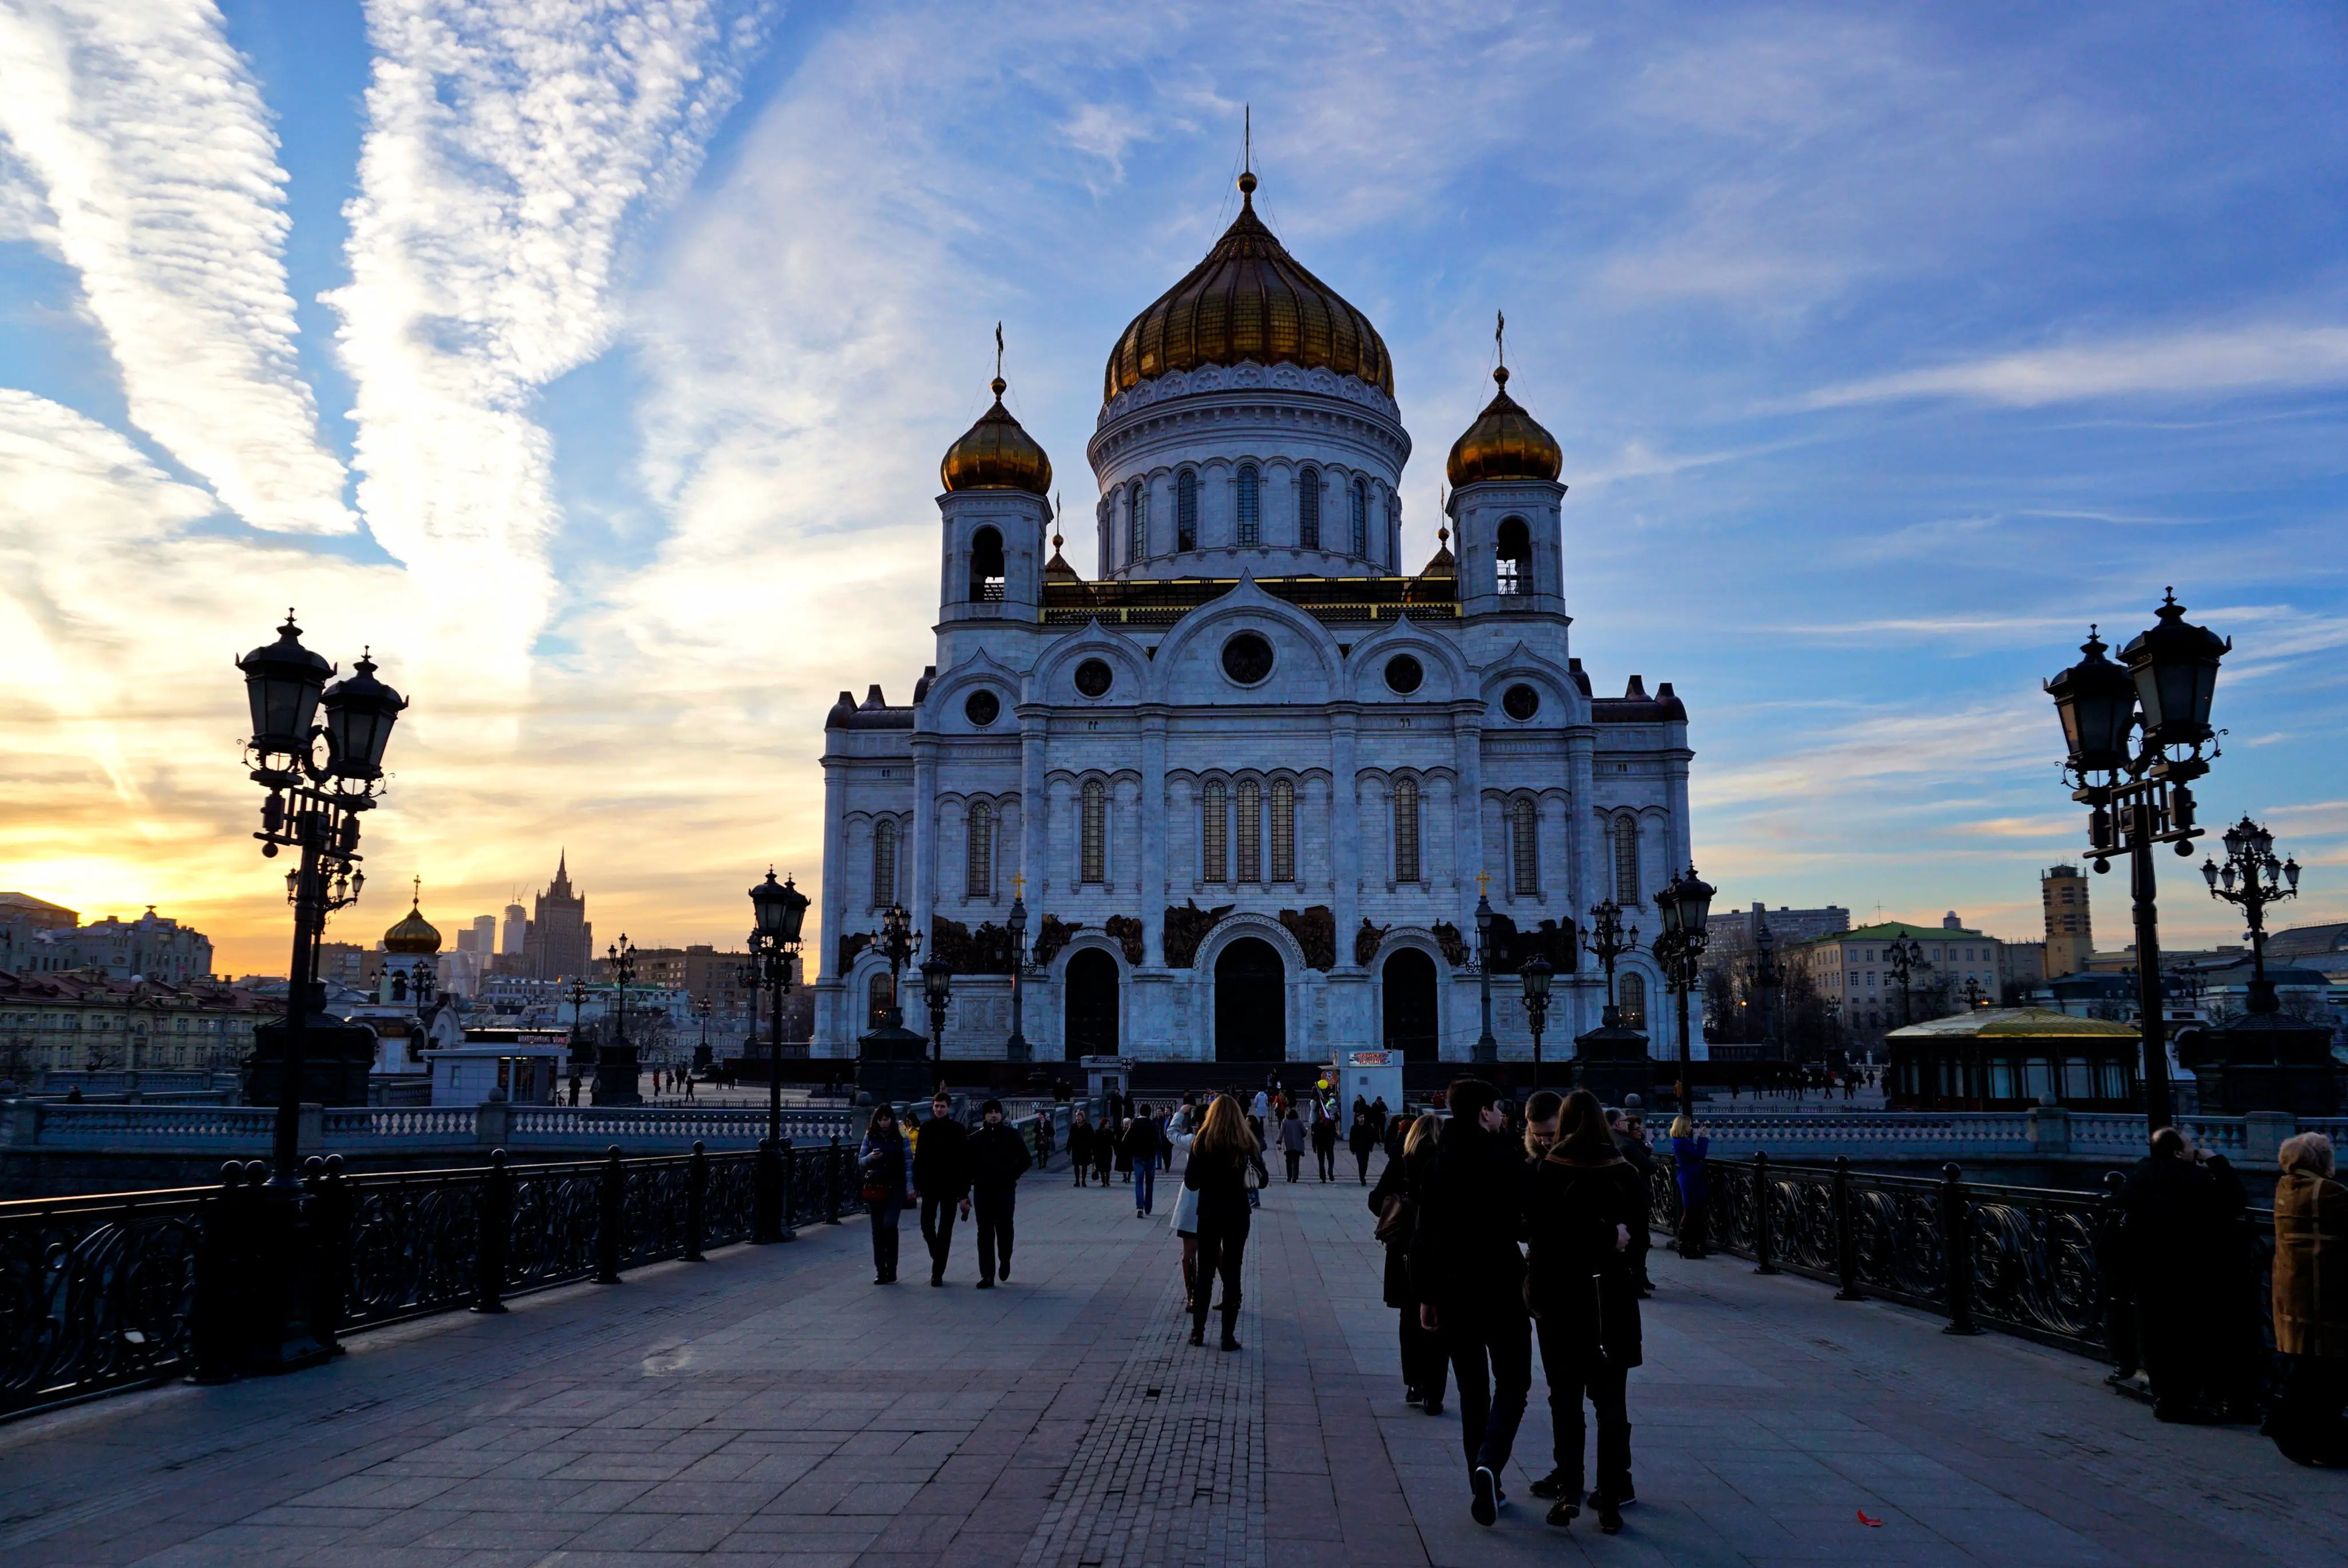 Christ the Saviour Cathedral, Moscow, Russia - Experiencing the Globe